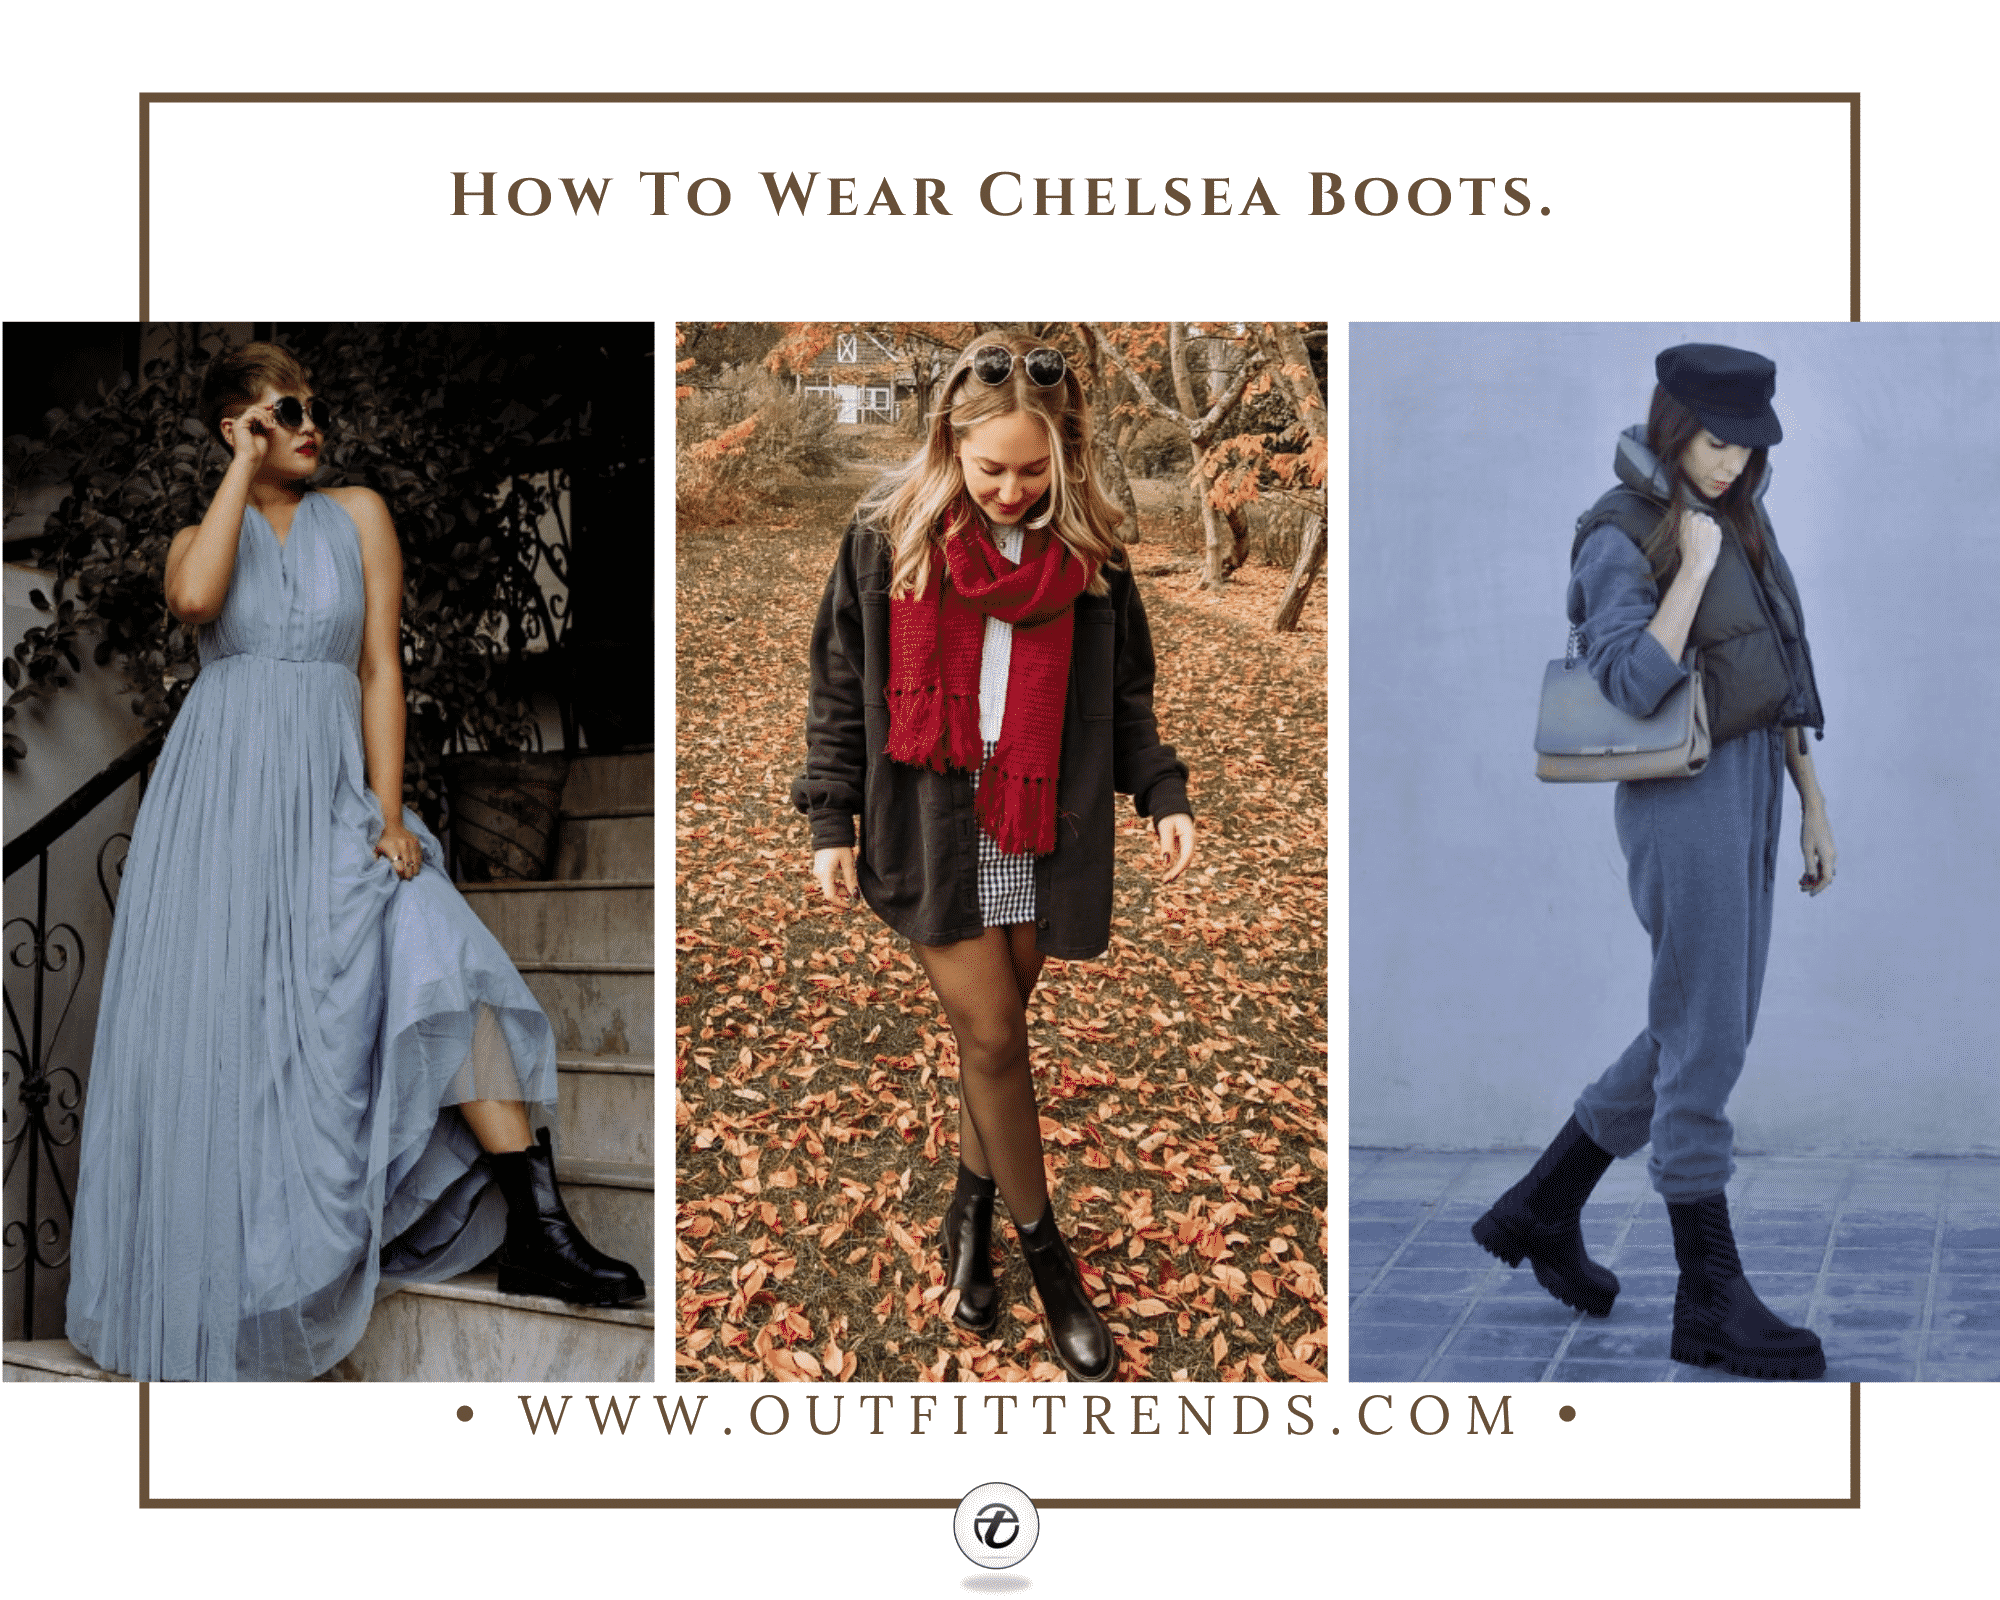 Chelsea boots for women: how to wear the season's most popular boots? –  Melvin & Hamilton